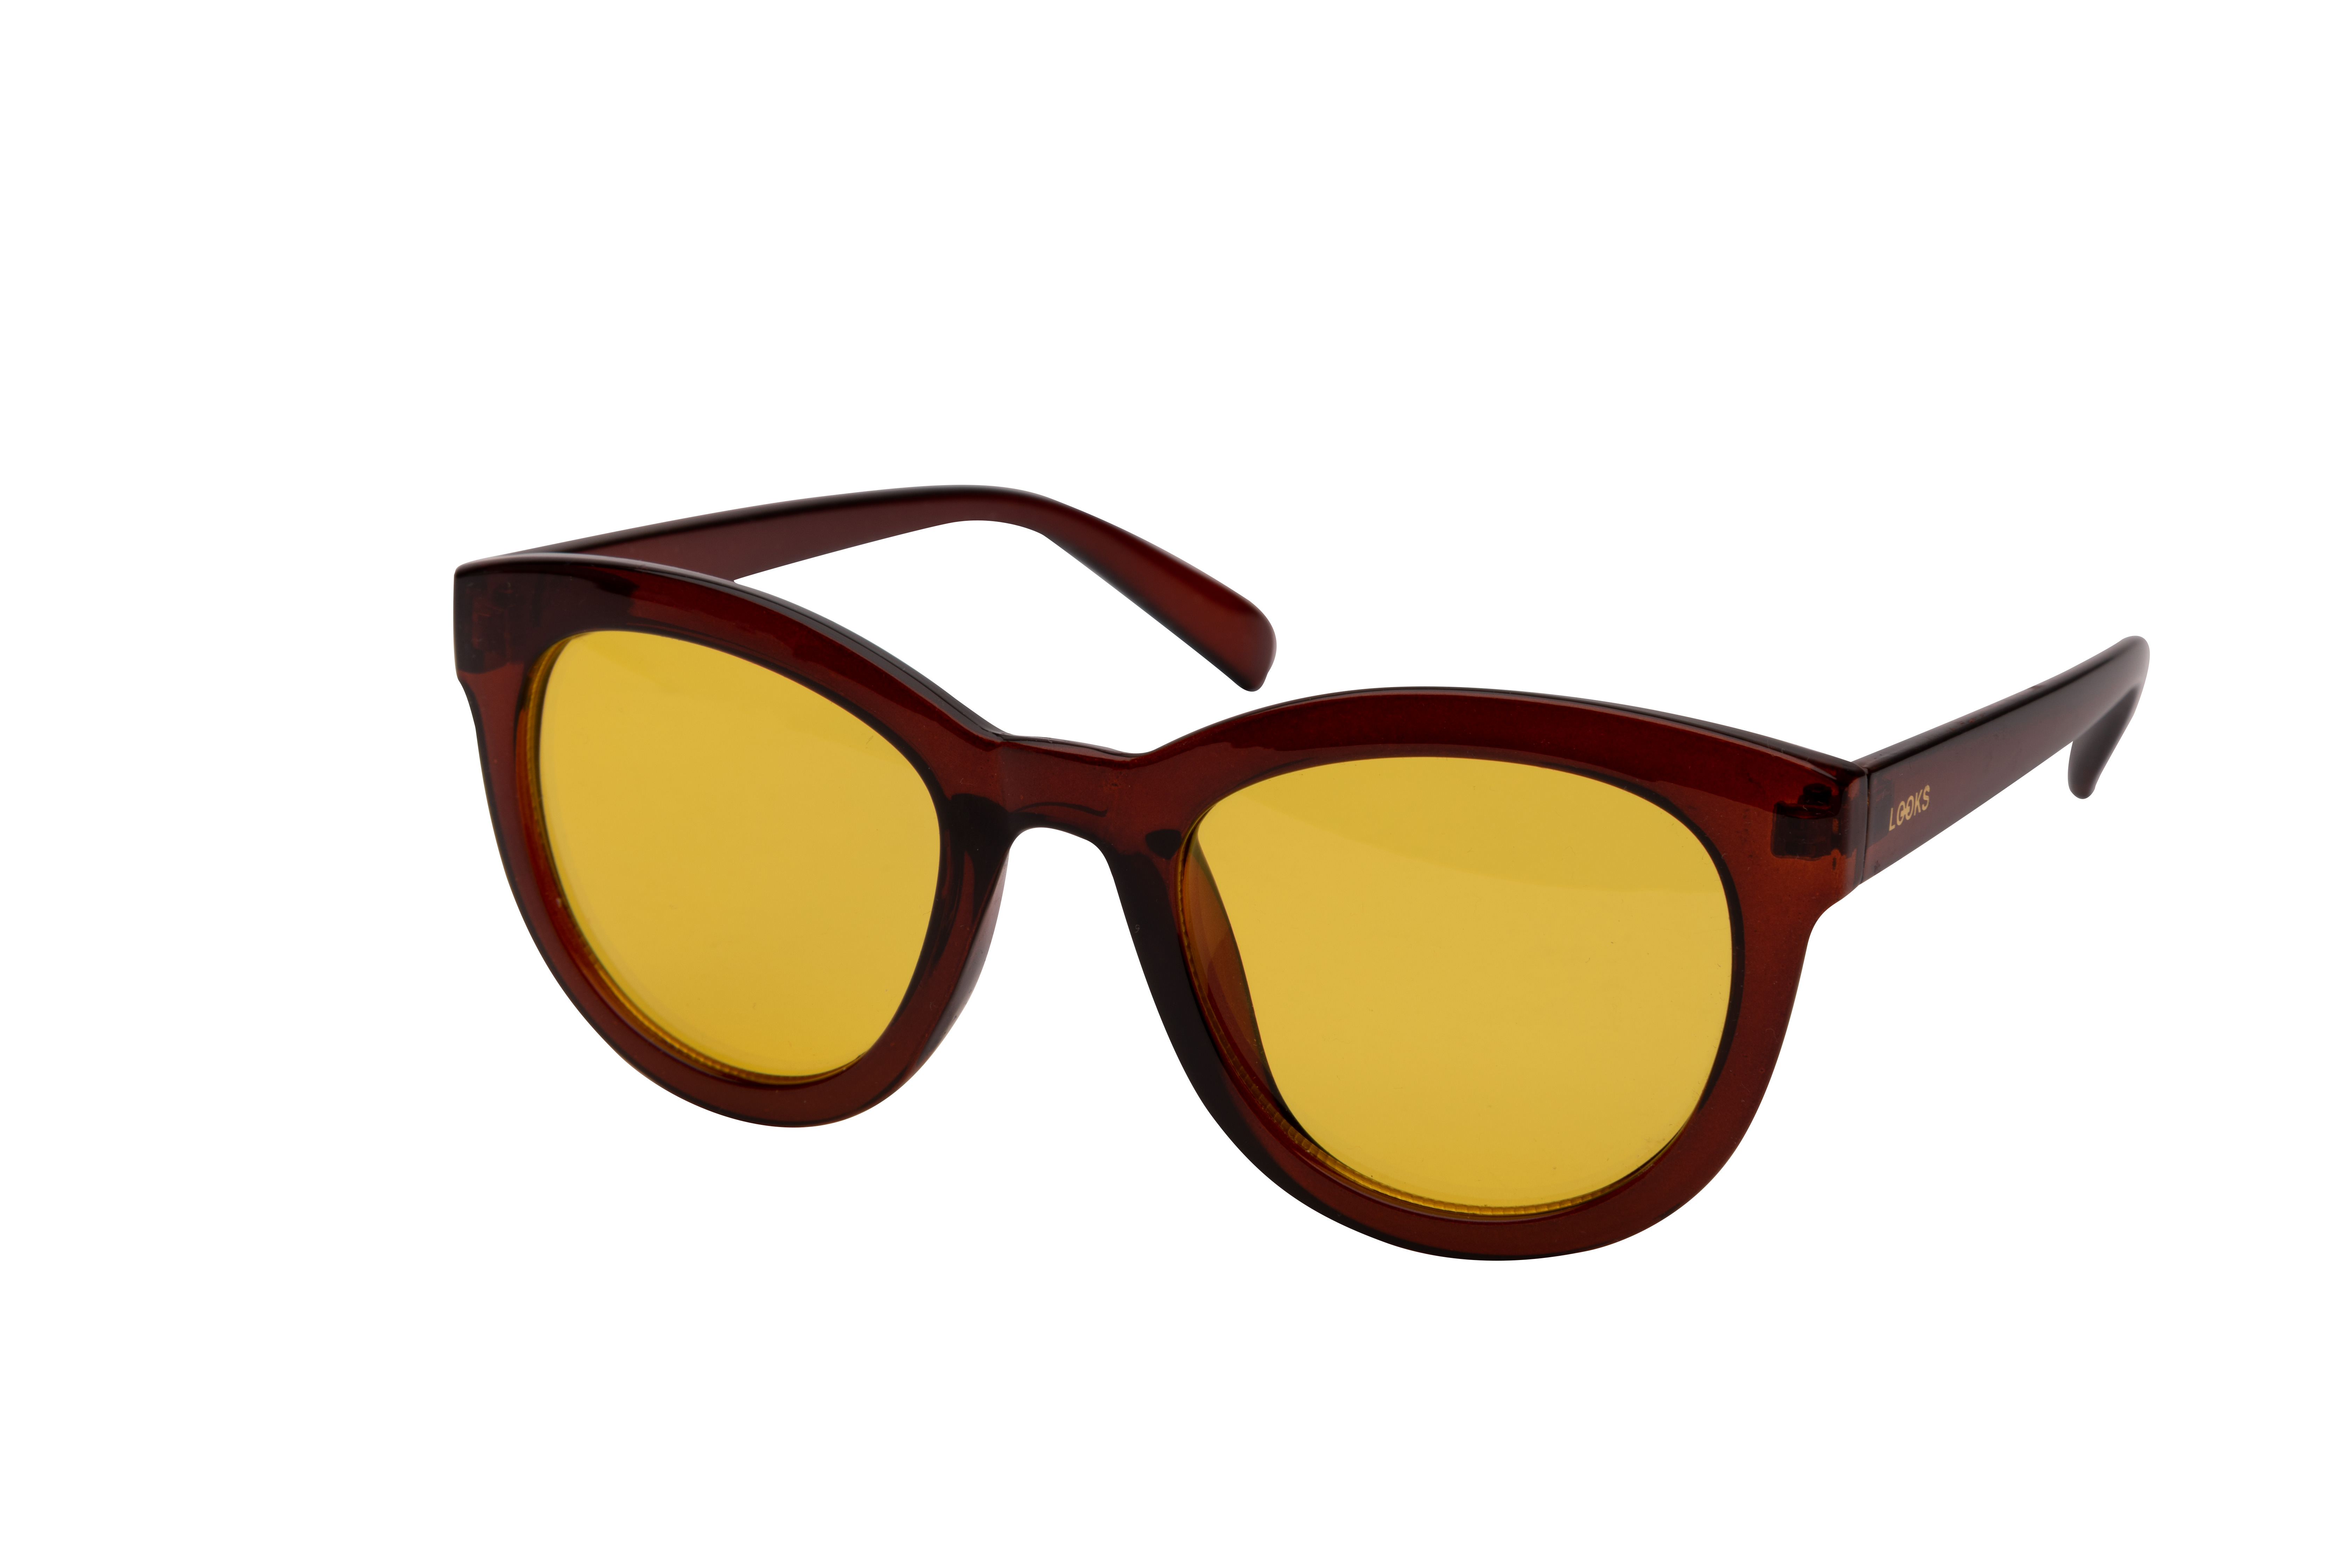 Sonnenbrille Notched Bridge Style dark-brown yellow SP-932 | LOOKS by Wolfgang Joop